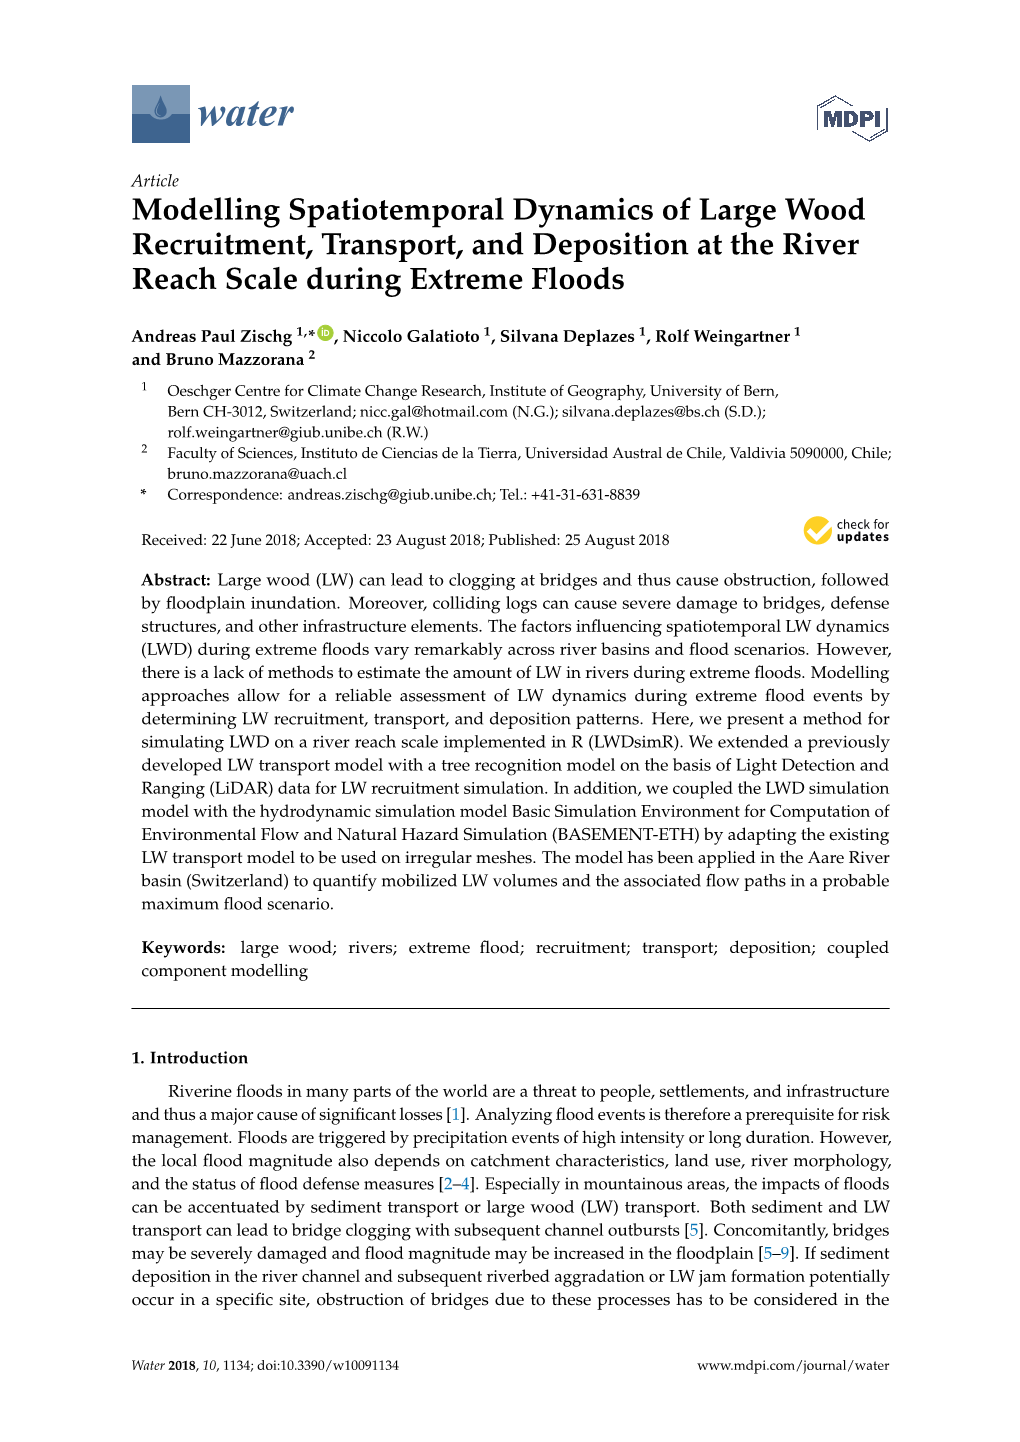 Modelling Spatiotemporal Dynamics of Large Wood Recruitment, Transport, and Deposition at the River Reach Scale During Extreme Floods